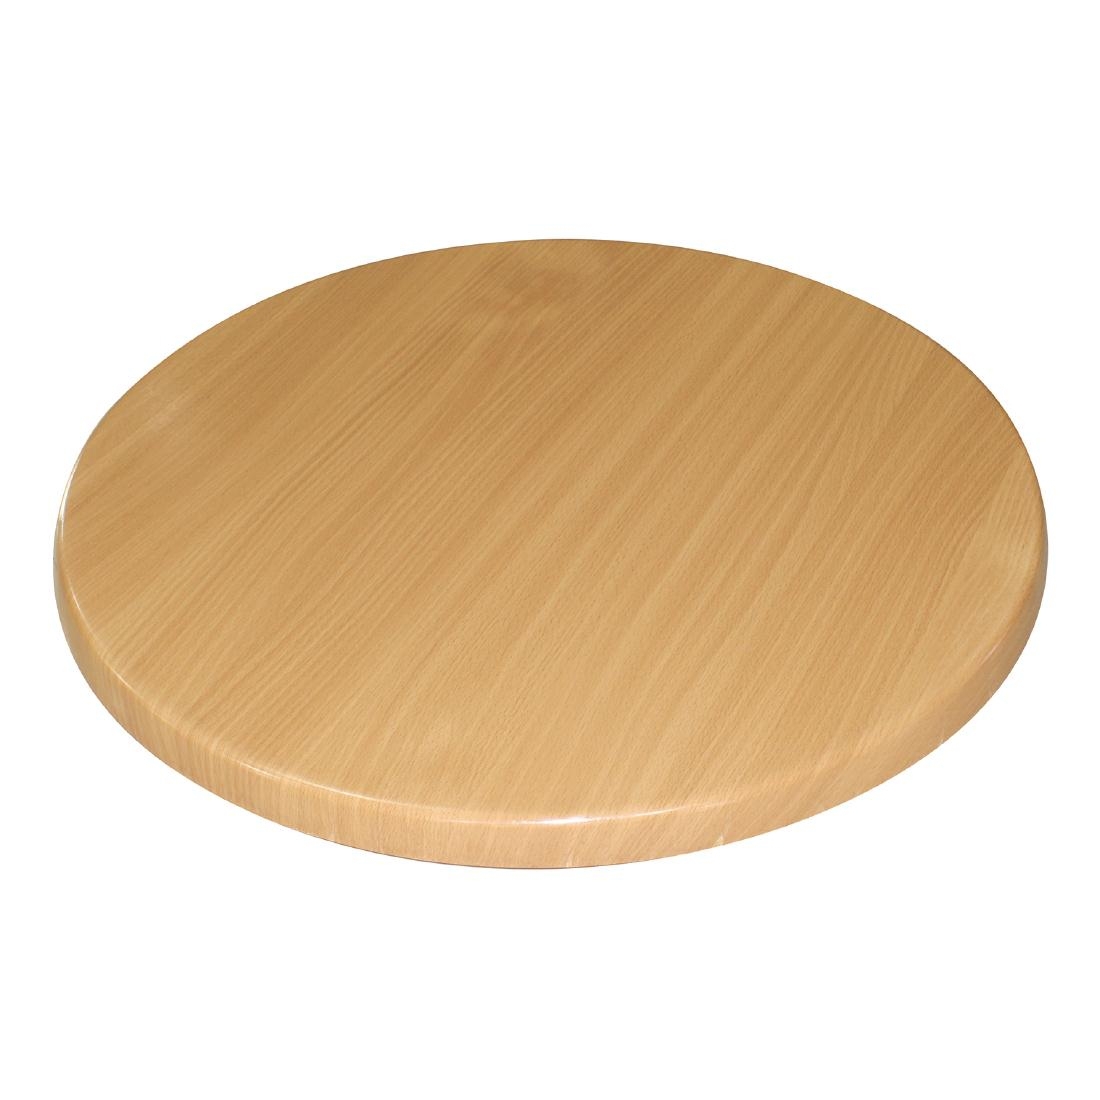 Bolero Pre-drilled Round Table Top Beech Effect 800mm